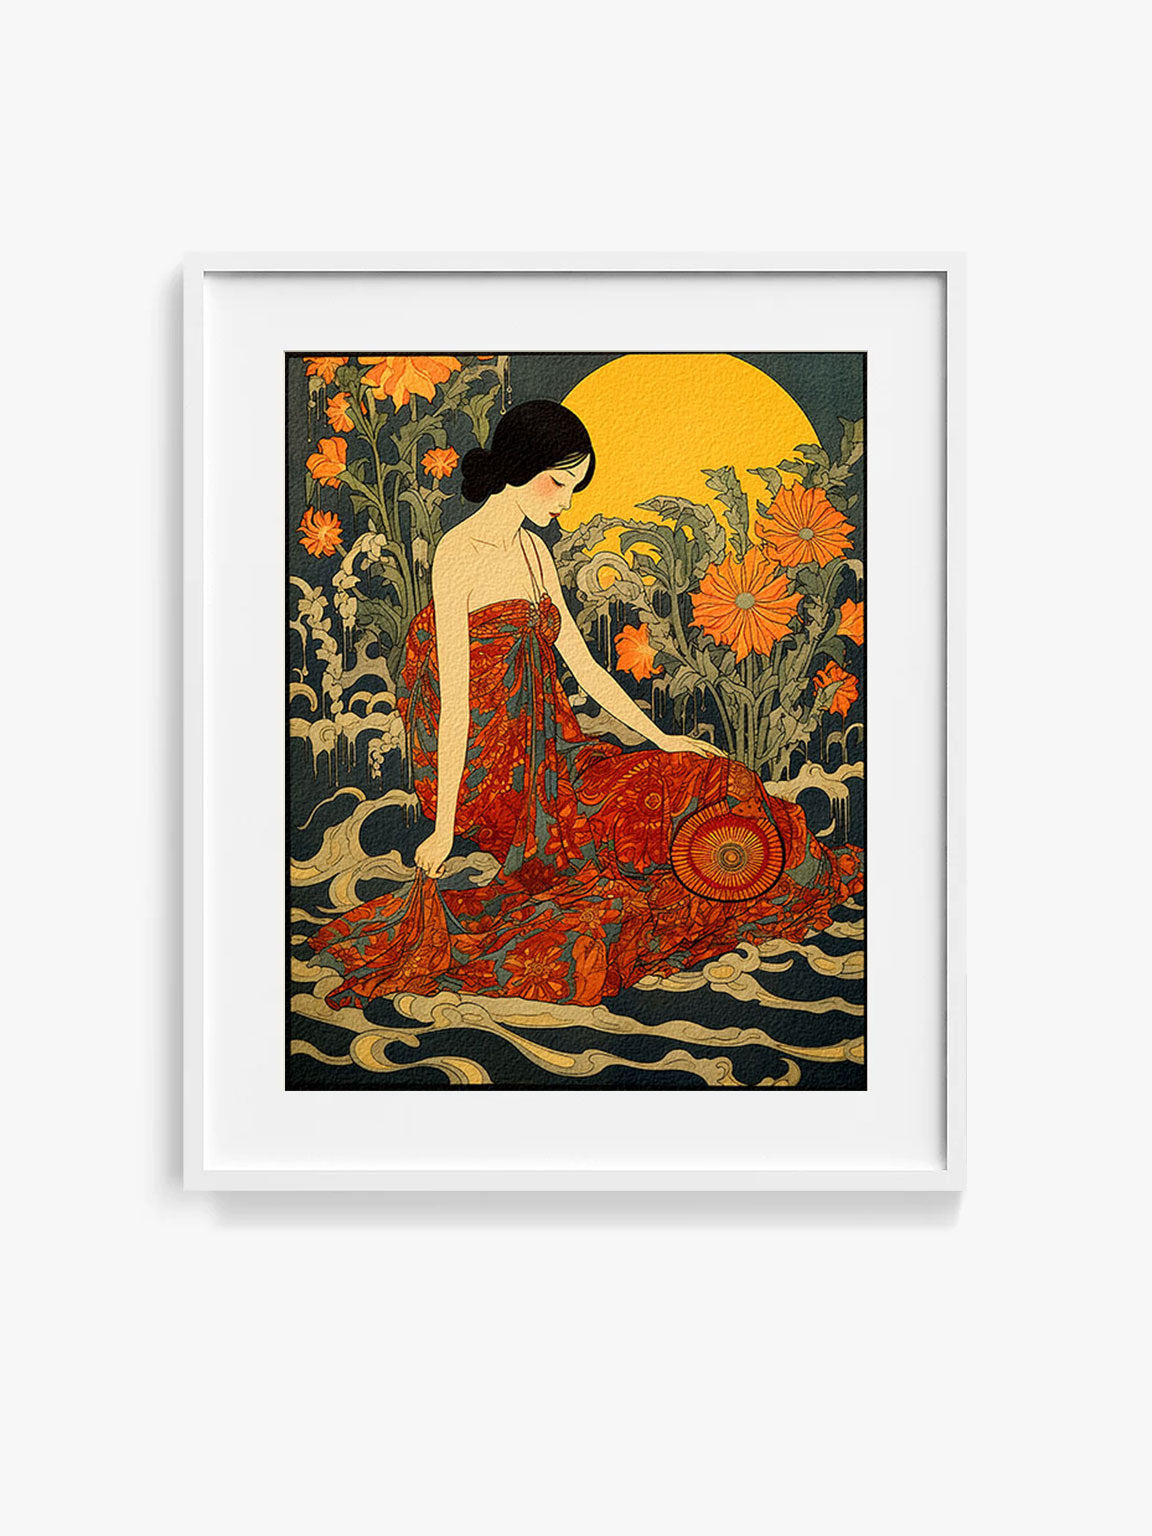 original art print, Vintage Retro Art Style Poster: Woman with Flowers in Orange Tones - Inspired by Art Deco, Fashion, and Classic Movies, Retro Glam Fashion Portrait, Modern Art Deco Print, Eclectic Punk Boho Decor, Vintage Flowers Wall Art, Interior Design, Moody Graphic Art, Retro Glam Fashion Portrait, Modern Art Deco Print, Eclectic Punk Boho Decor, Vintage Flowers Wall Art, Interior Design, Moody Graphic Art, Bathroom Art, Living Room Wall Decor, Art for your Walls